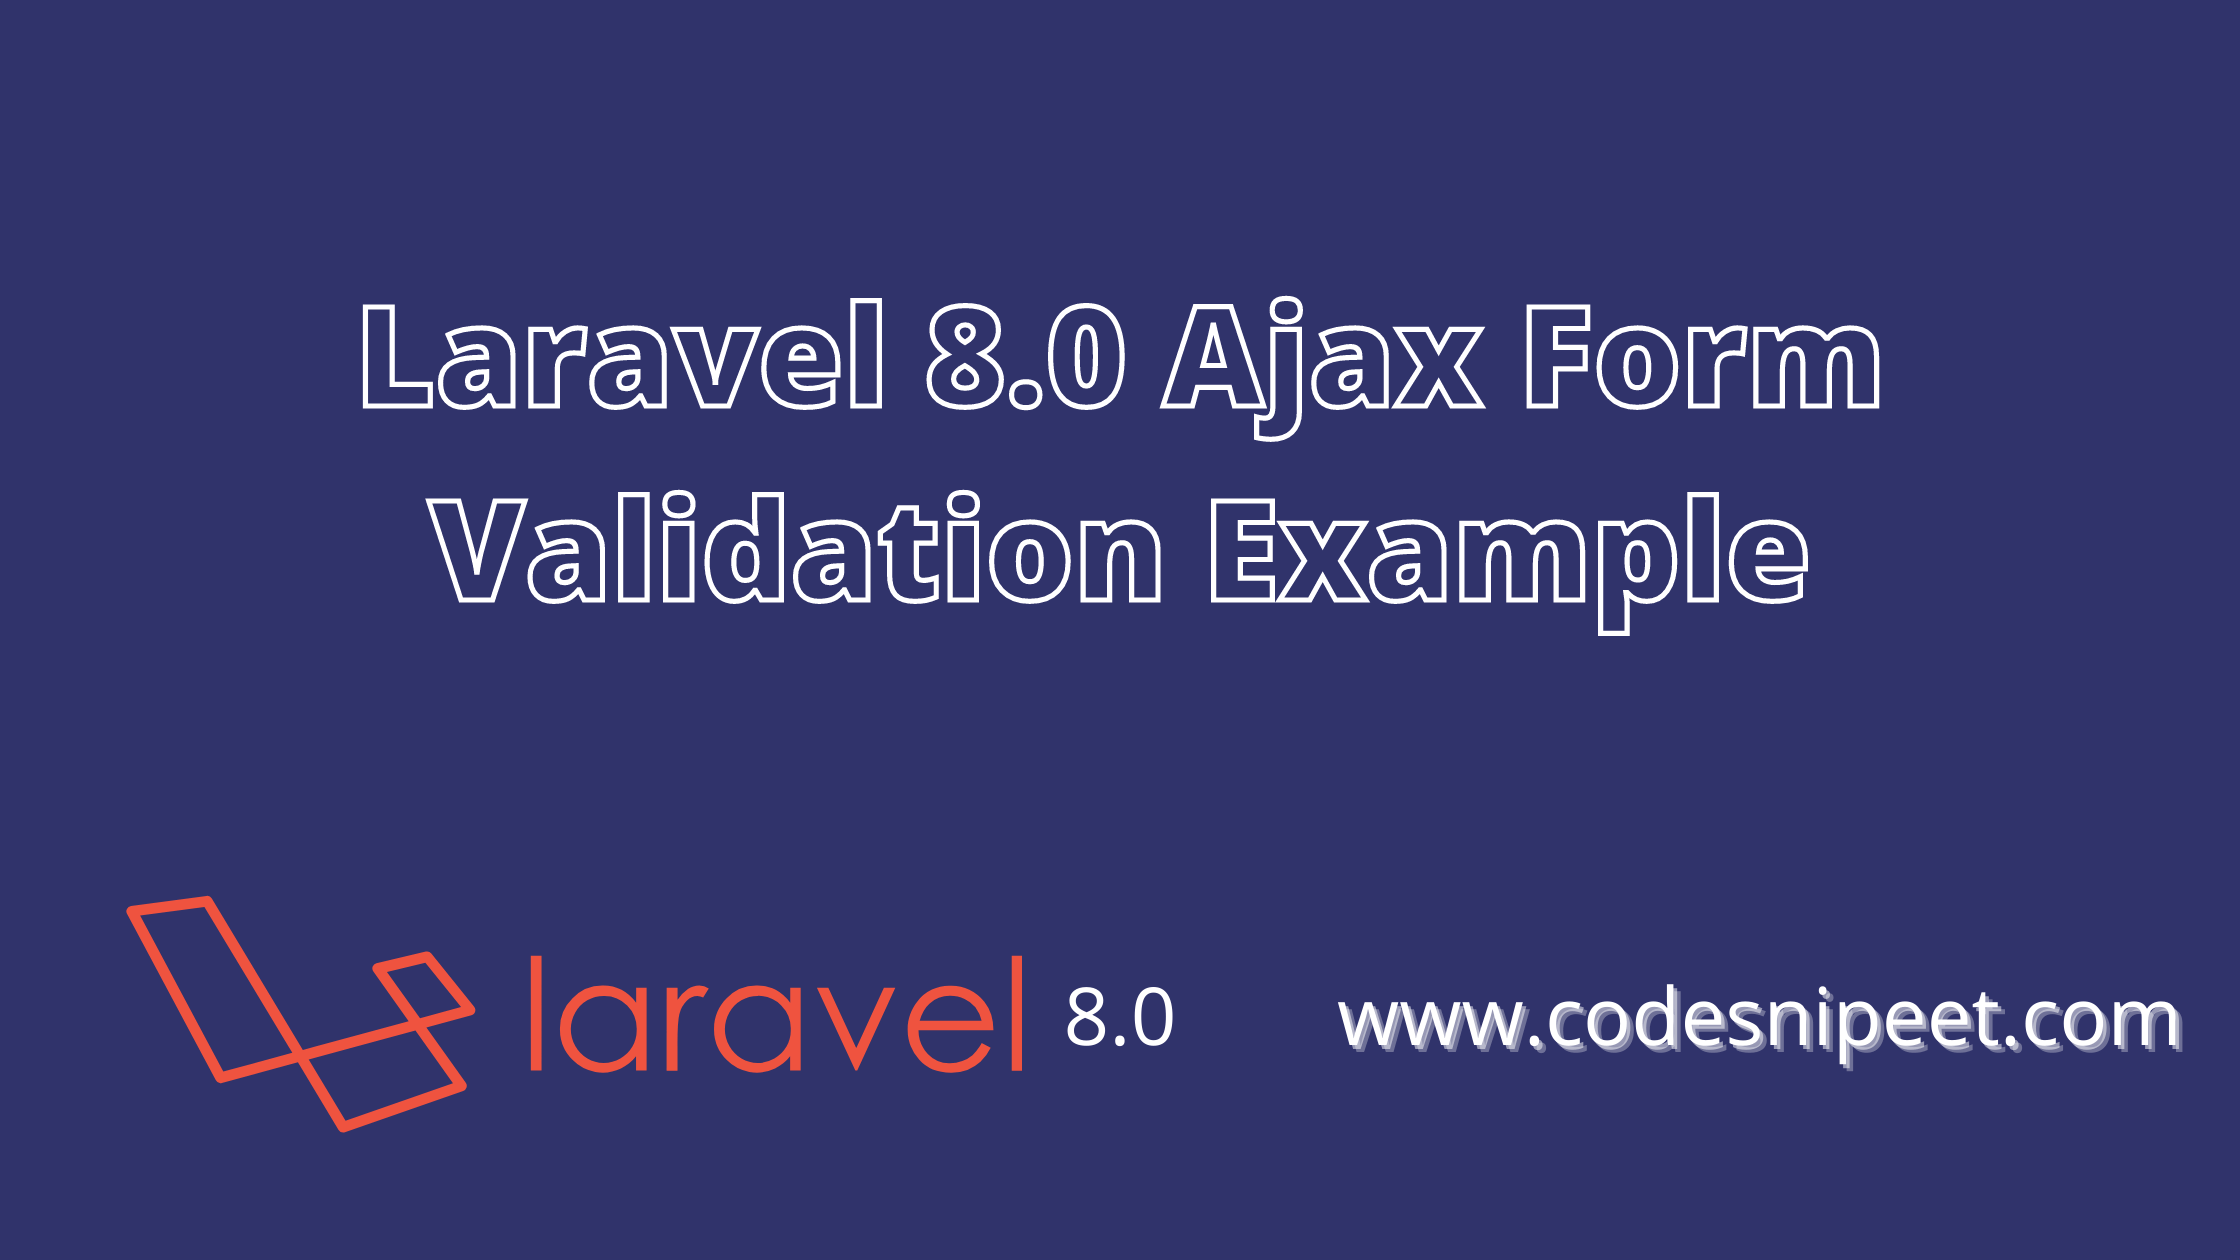 You are currently viewing Laravel 8.0 Ajax Form Validation Example